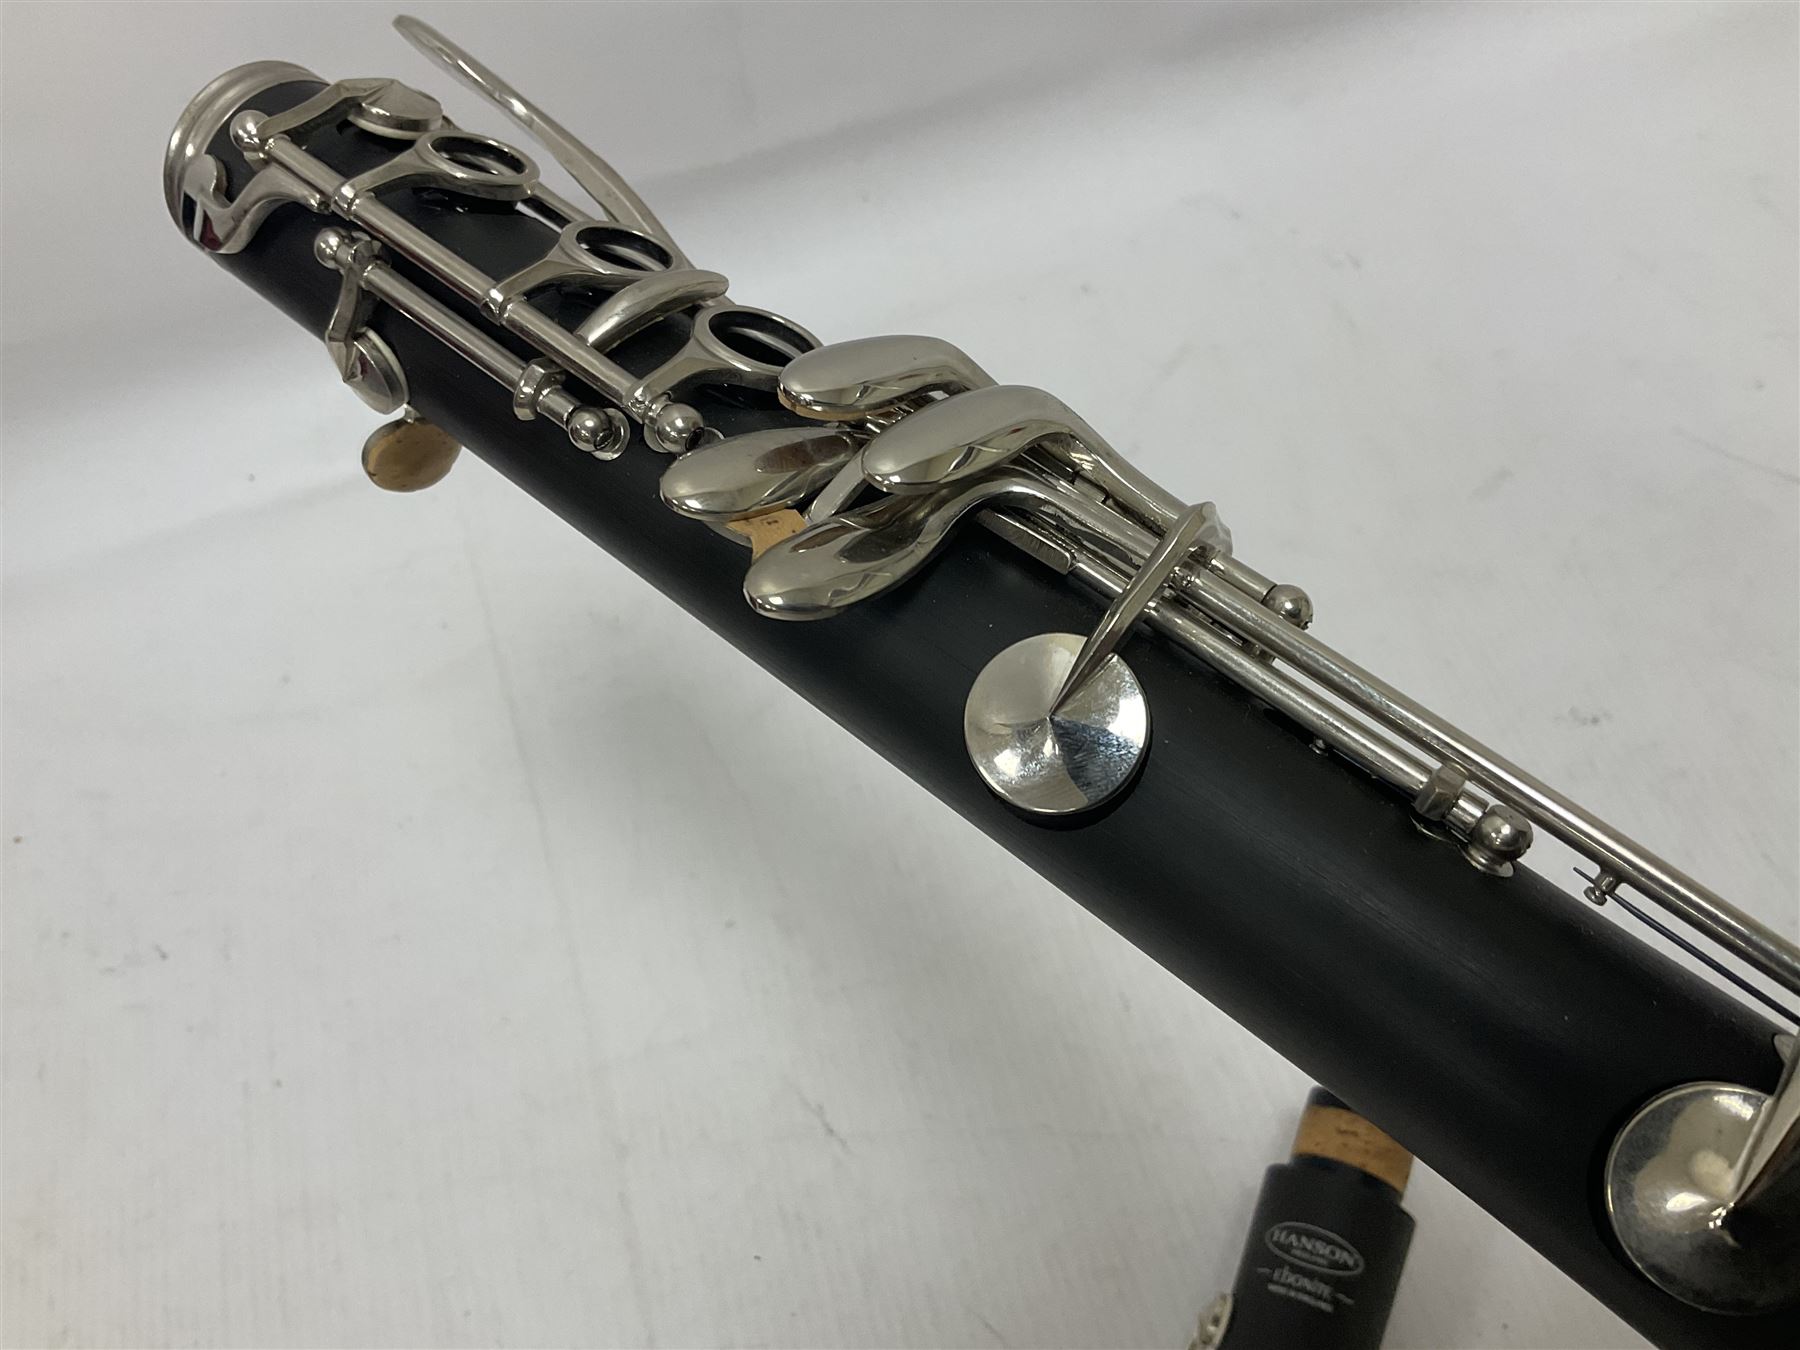 Hanson B Flat clarinet in a fitted case with accessories and three boxes of Vandoren reeds - Image 19 of 21